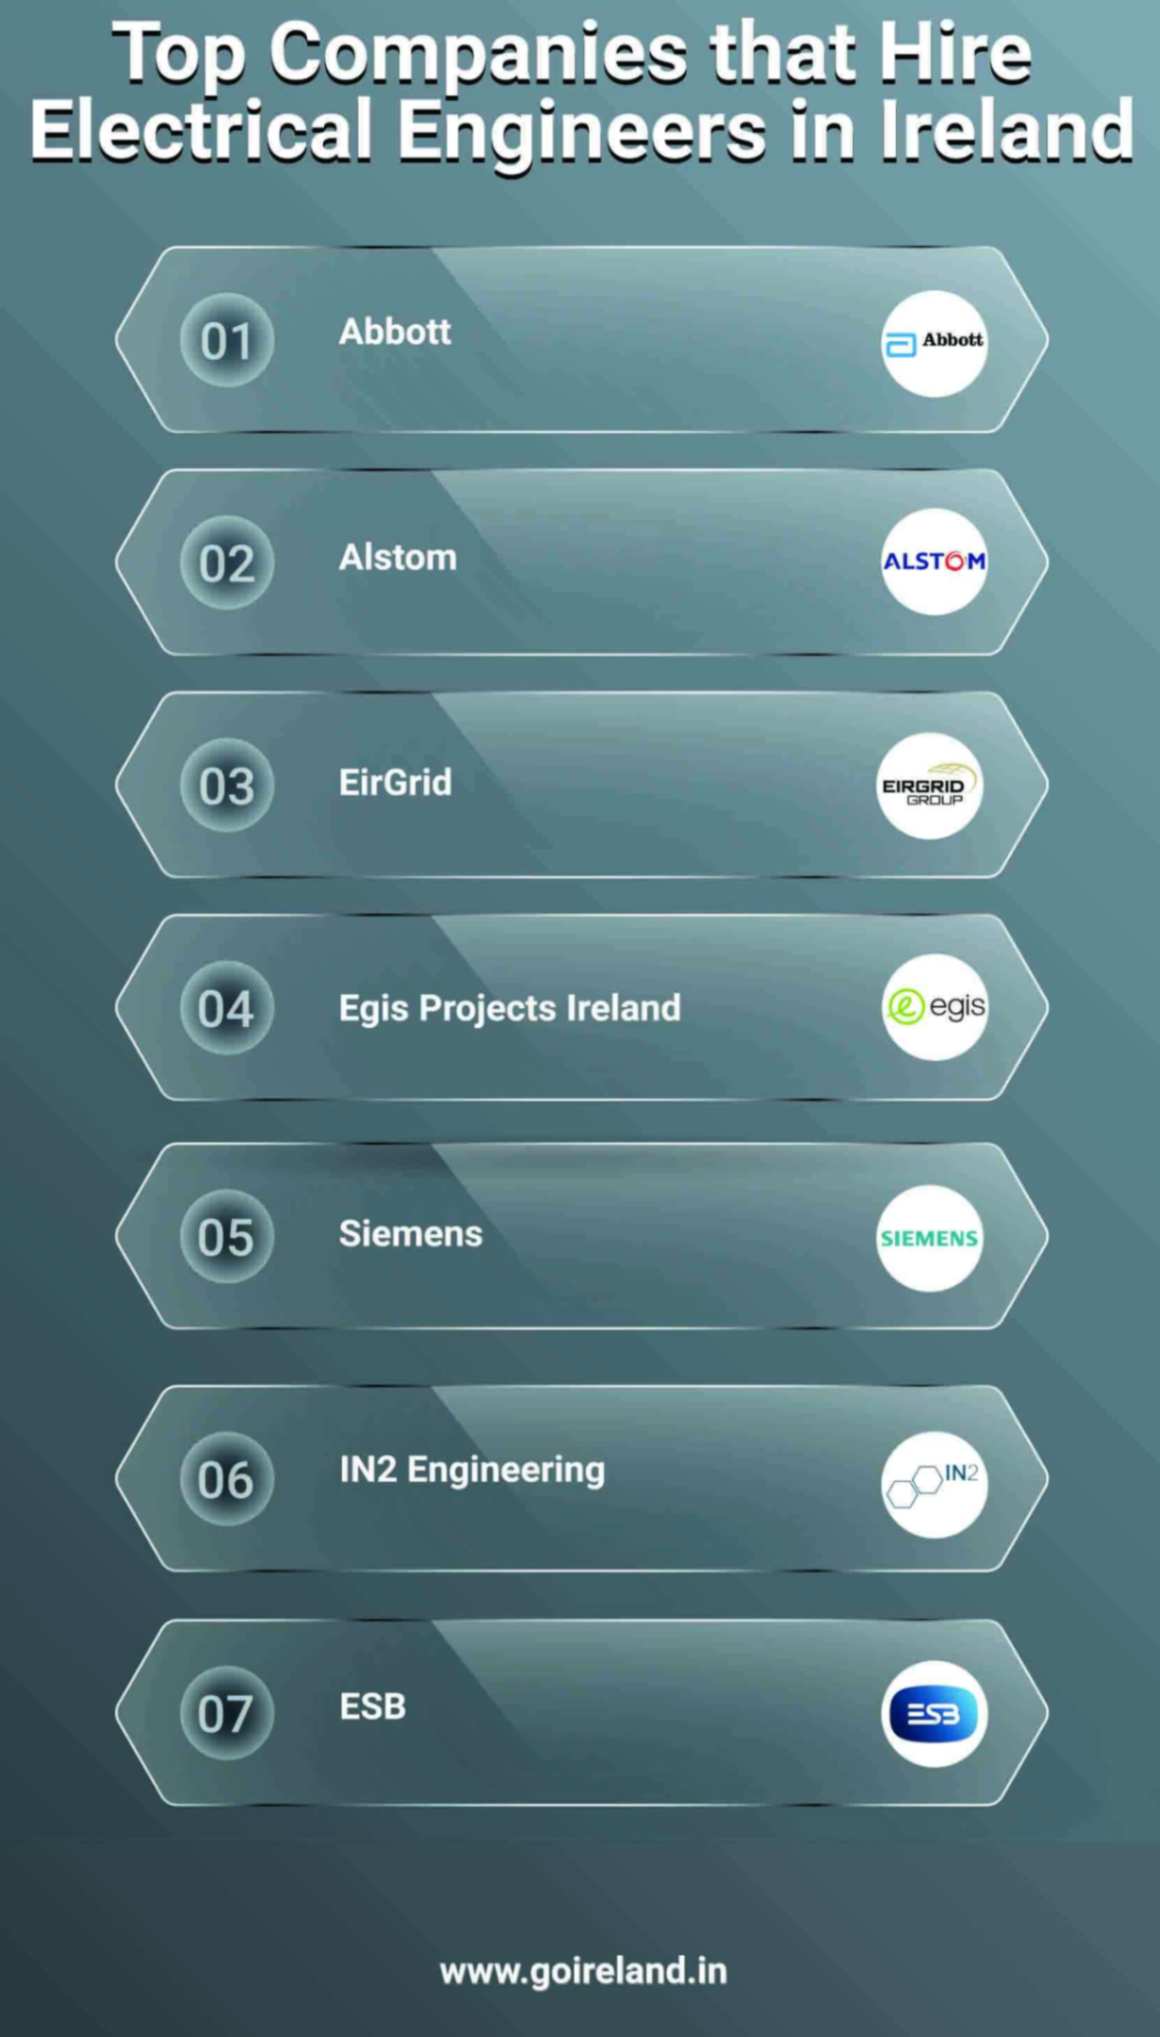 Top Companies that Hire Electrical Engineers in Ireland